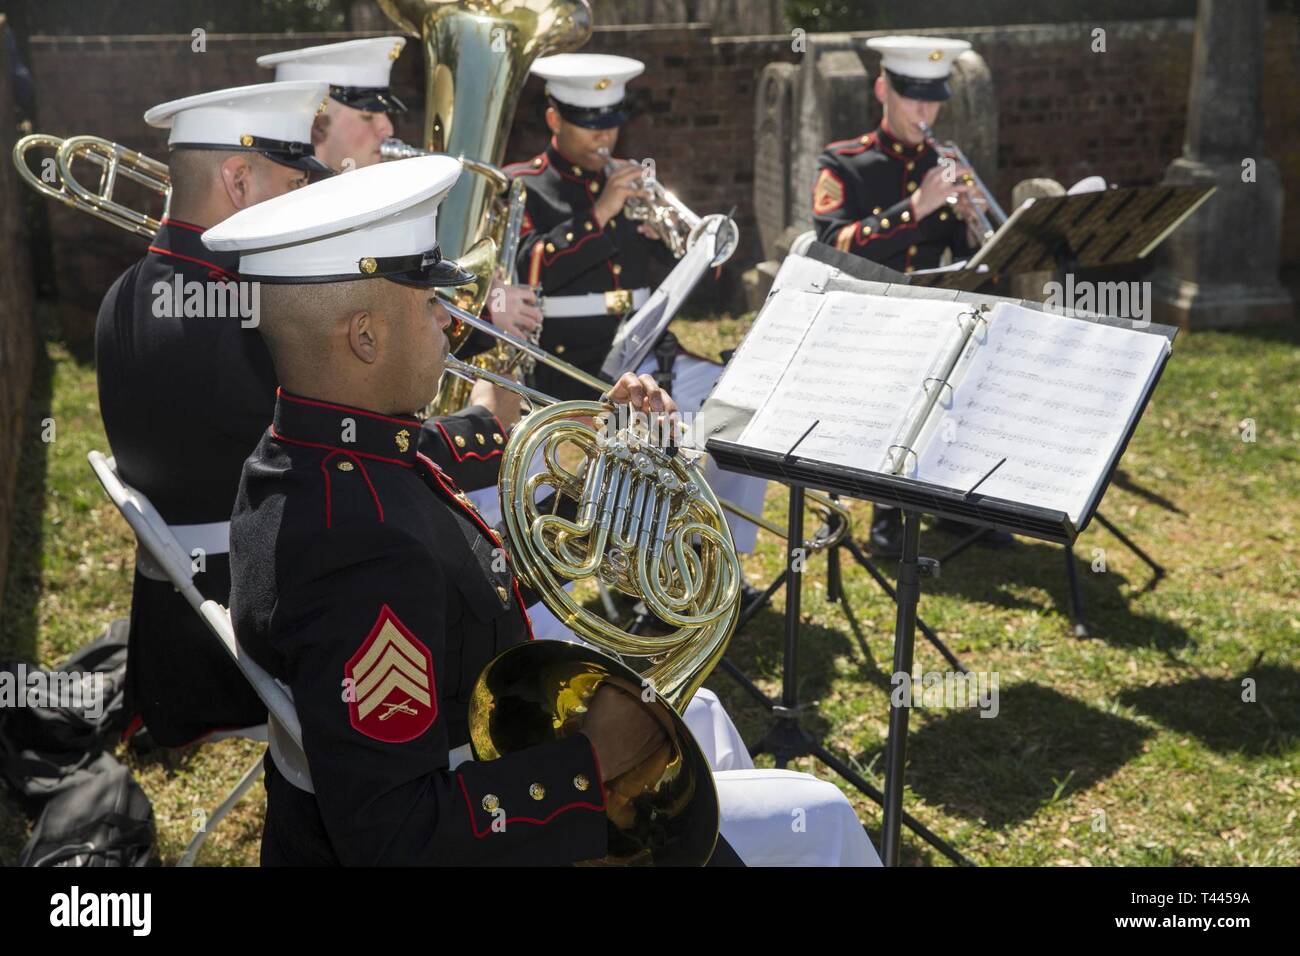 The Quantico Marine Band preform at the Madison wreath laying ceremony, held at the final resting place of the 4th President of the United States, James Madison, at Montpelier, Orange, Va., March 16, 2019. This event was held in commemoration of the 268th anniversary of the birthdate of Madison, and has also been decreed as James Madison Appreciation Day for the Commonwealth of Virginia. Stock Photo